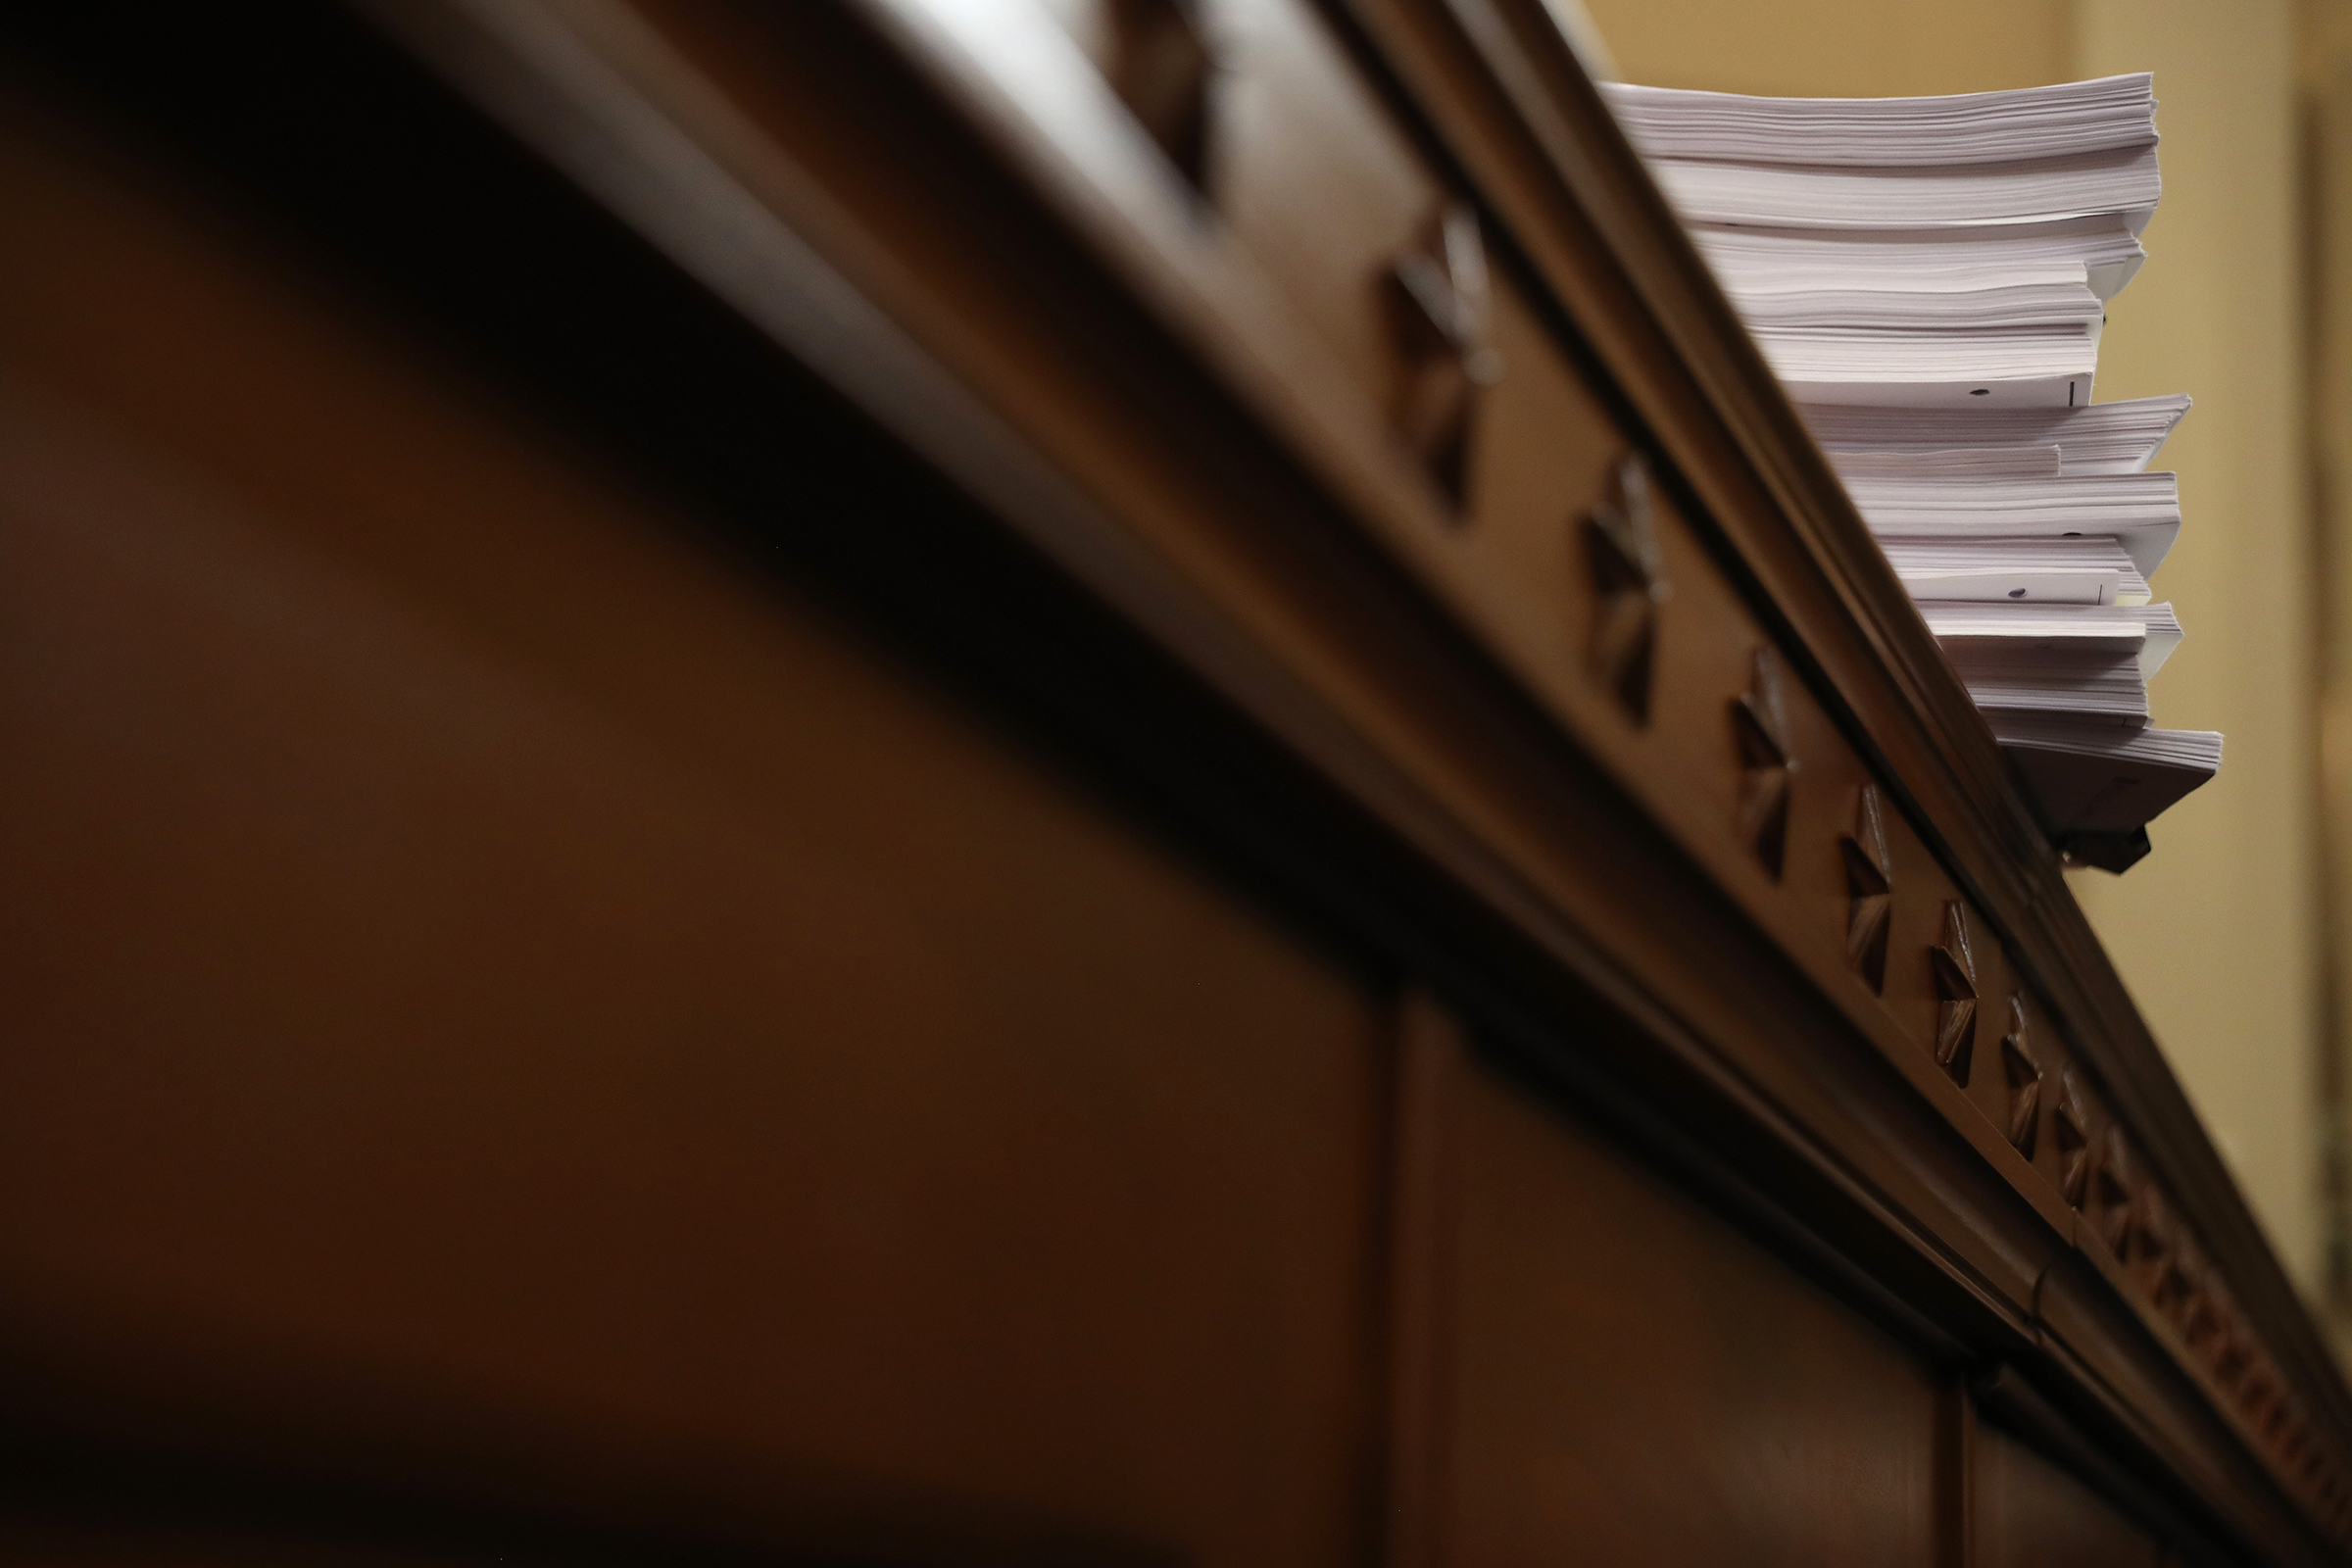 A stack of transcrips of depositions are shown during the third day of open hearings in the impeachment inquiry against President Donald Trump, Nov. 19, 2019.